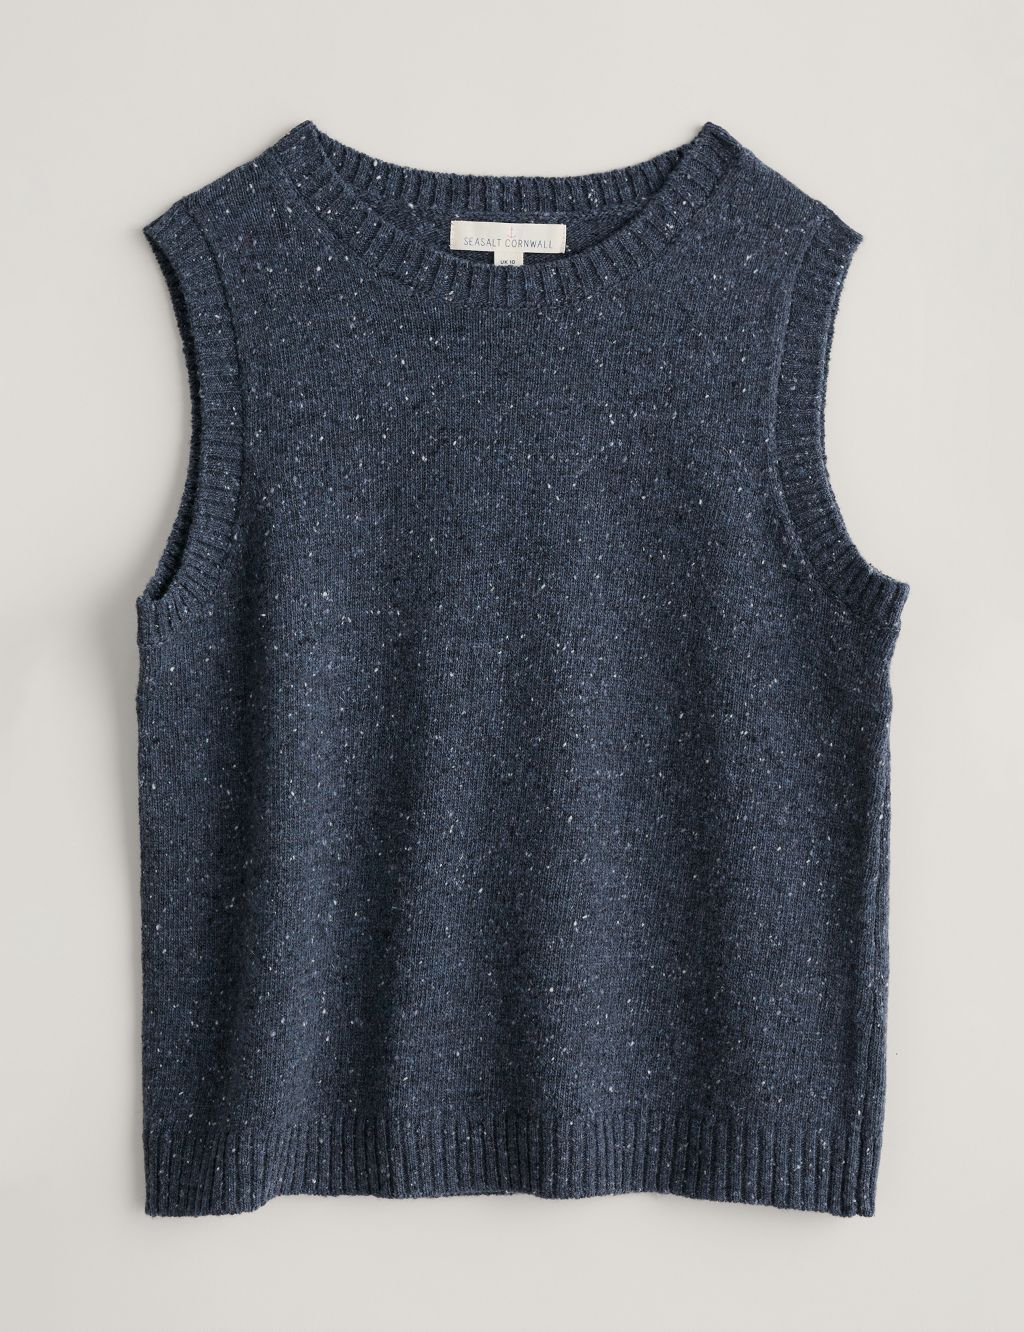 Lambswool Rich Crew Neck Knitted Vest image 2